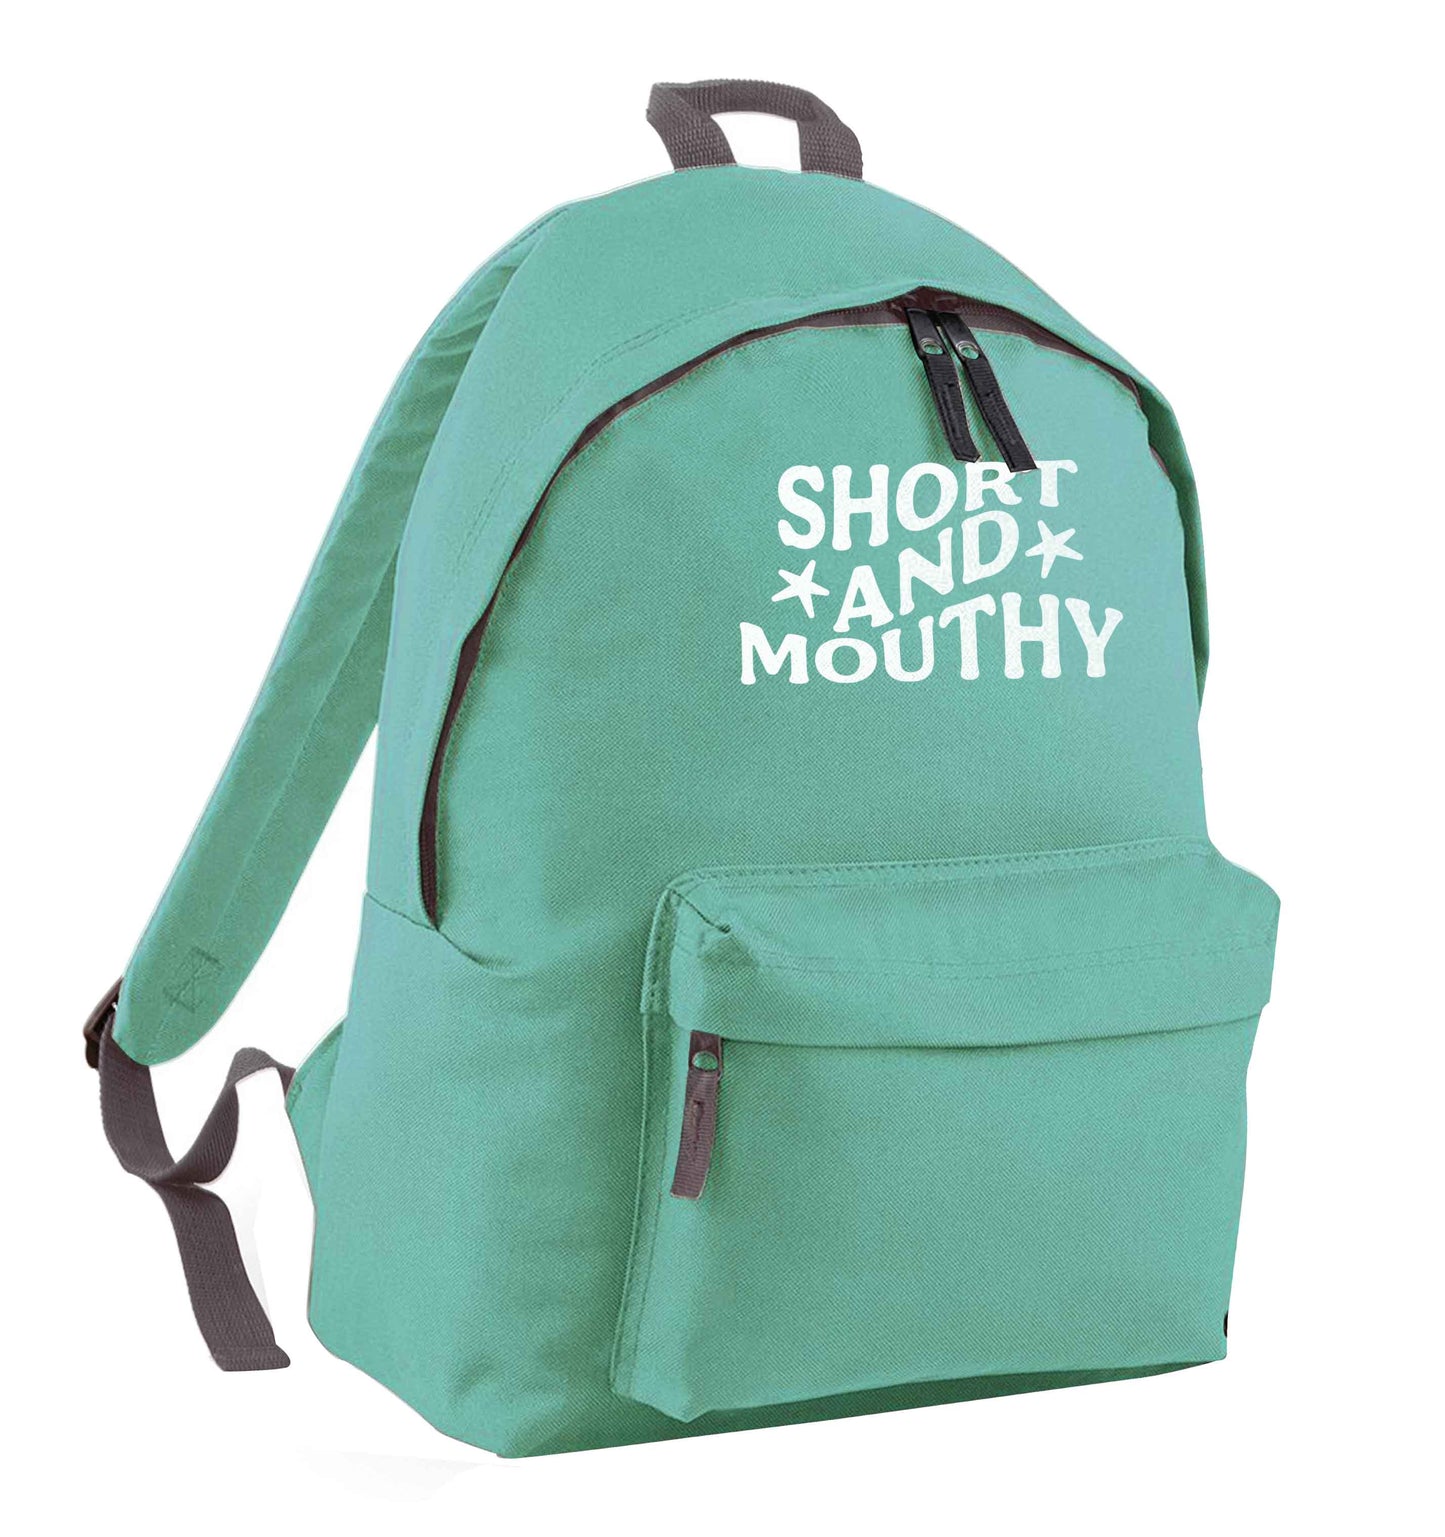 Short and mouthy mint adults backpack